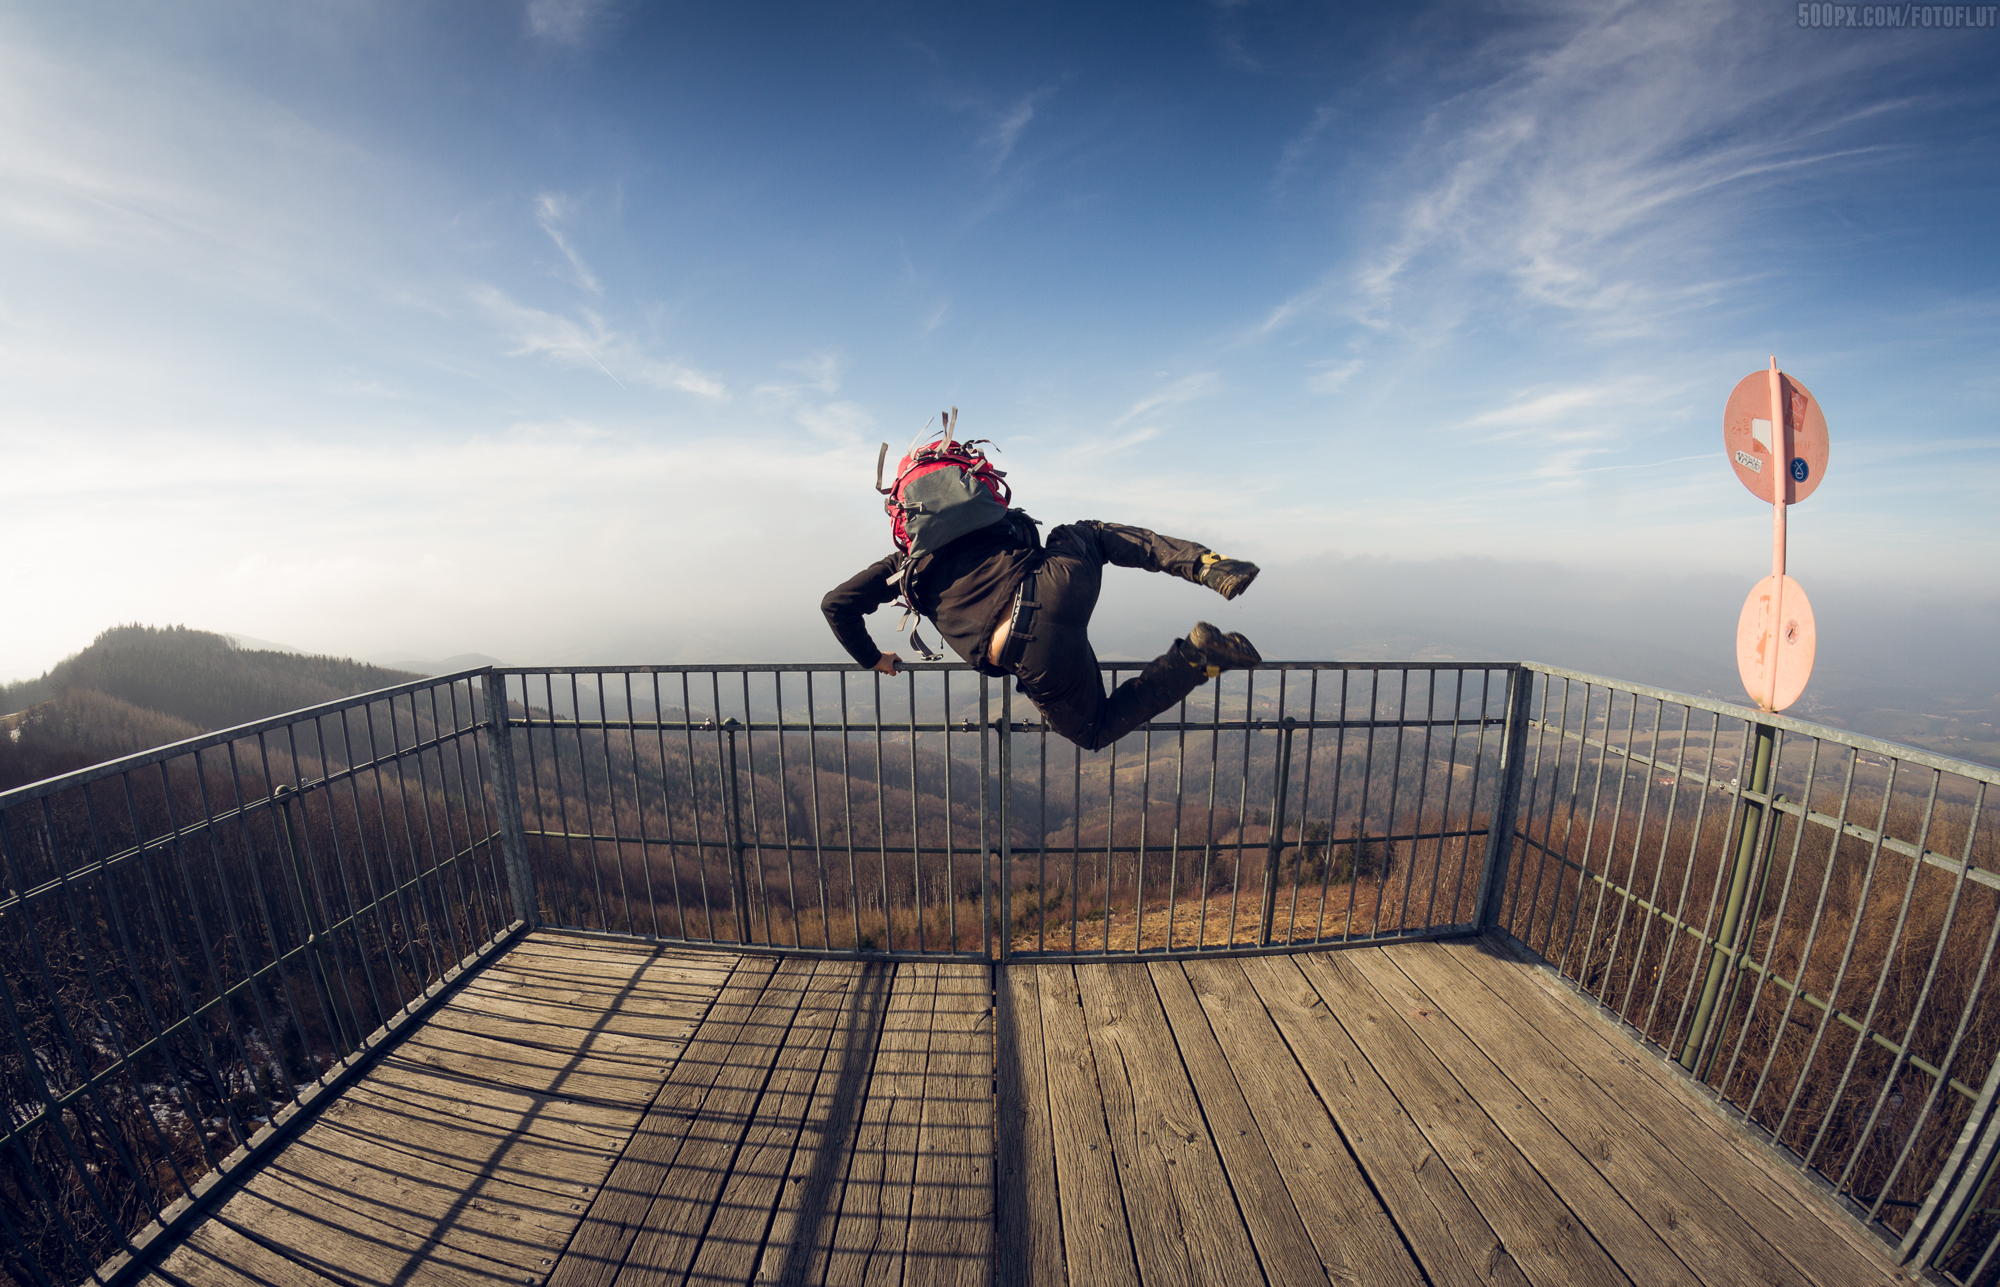 Weekly Contest: 29 Action-Packed Jumping Photos + New Blue Hour Theme